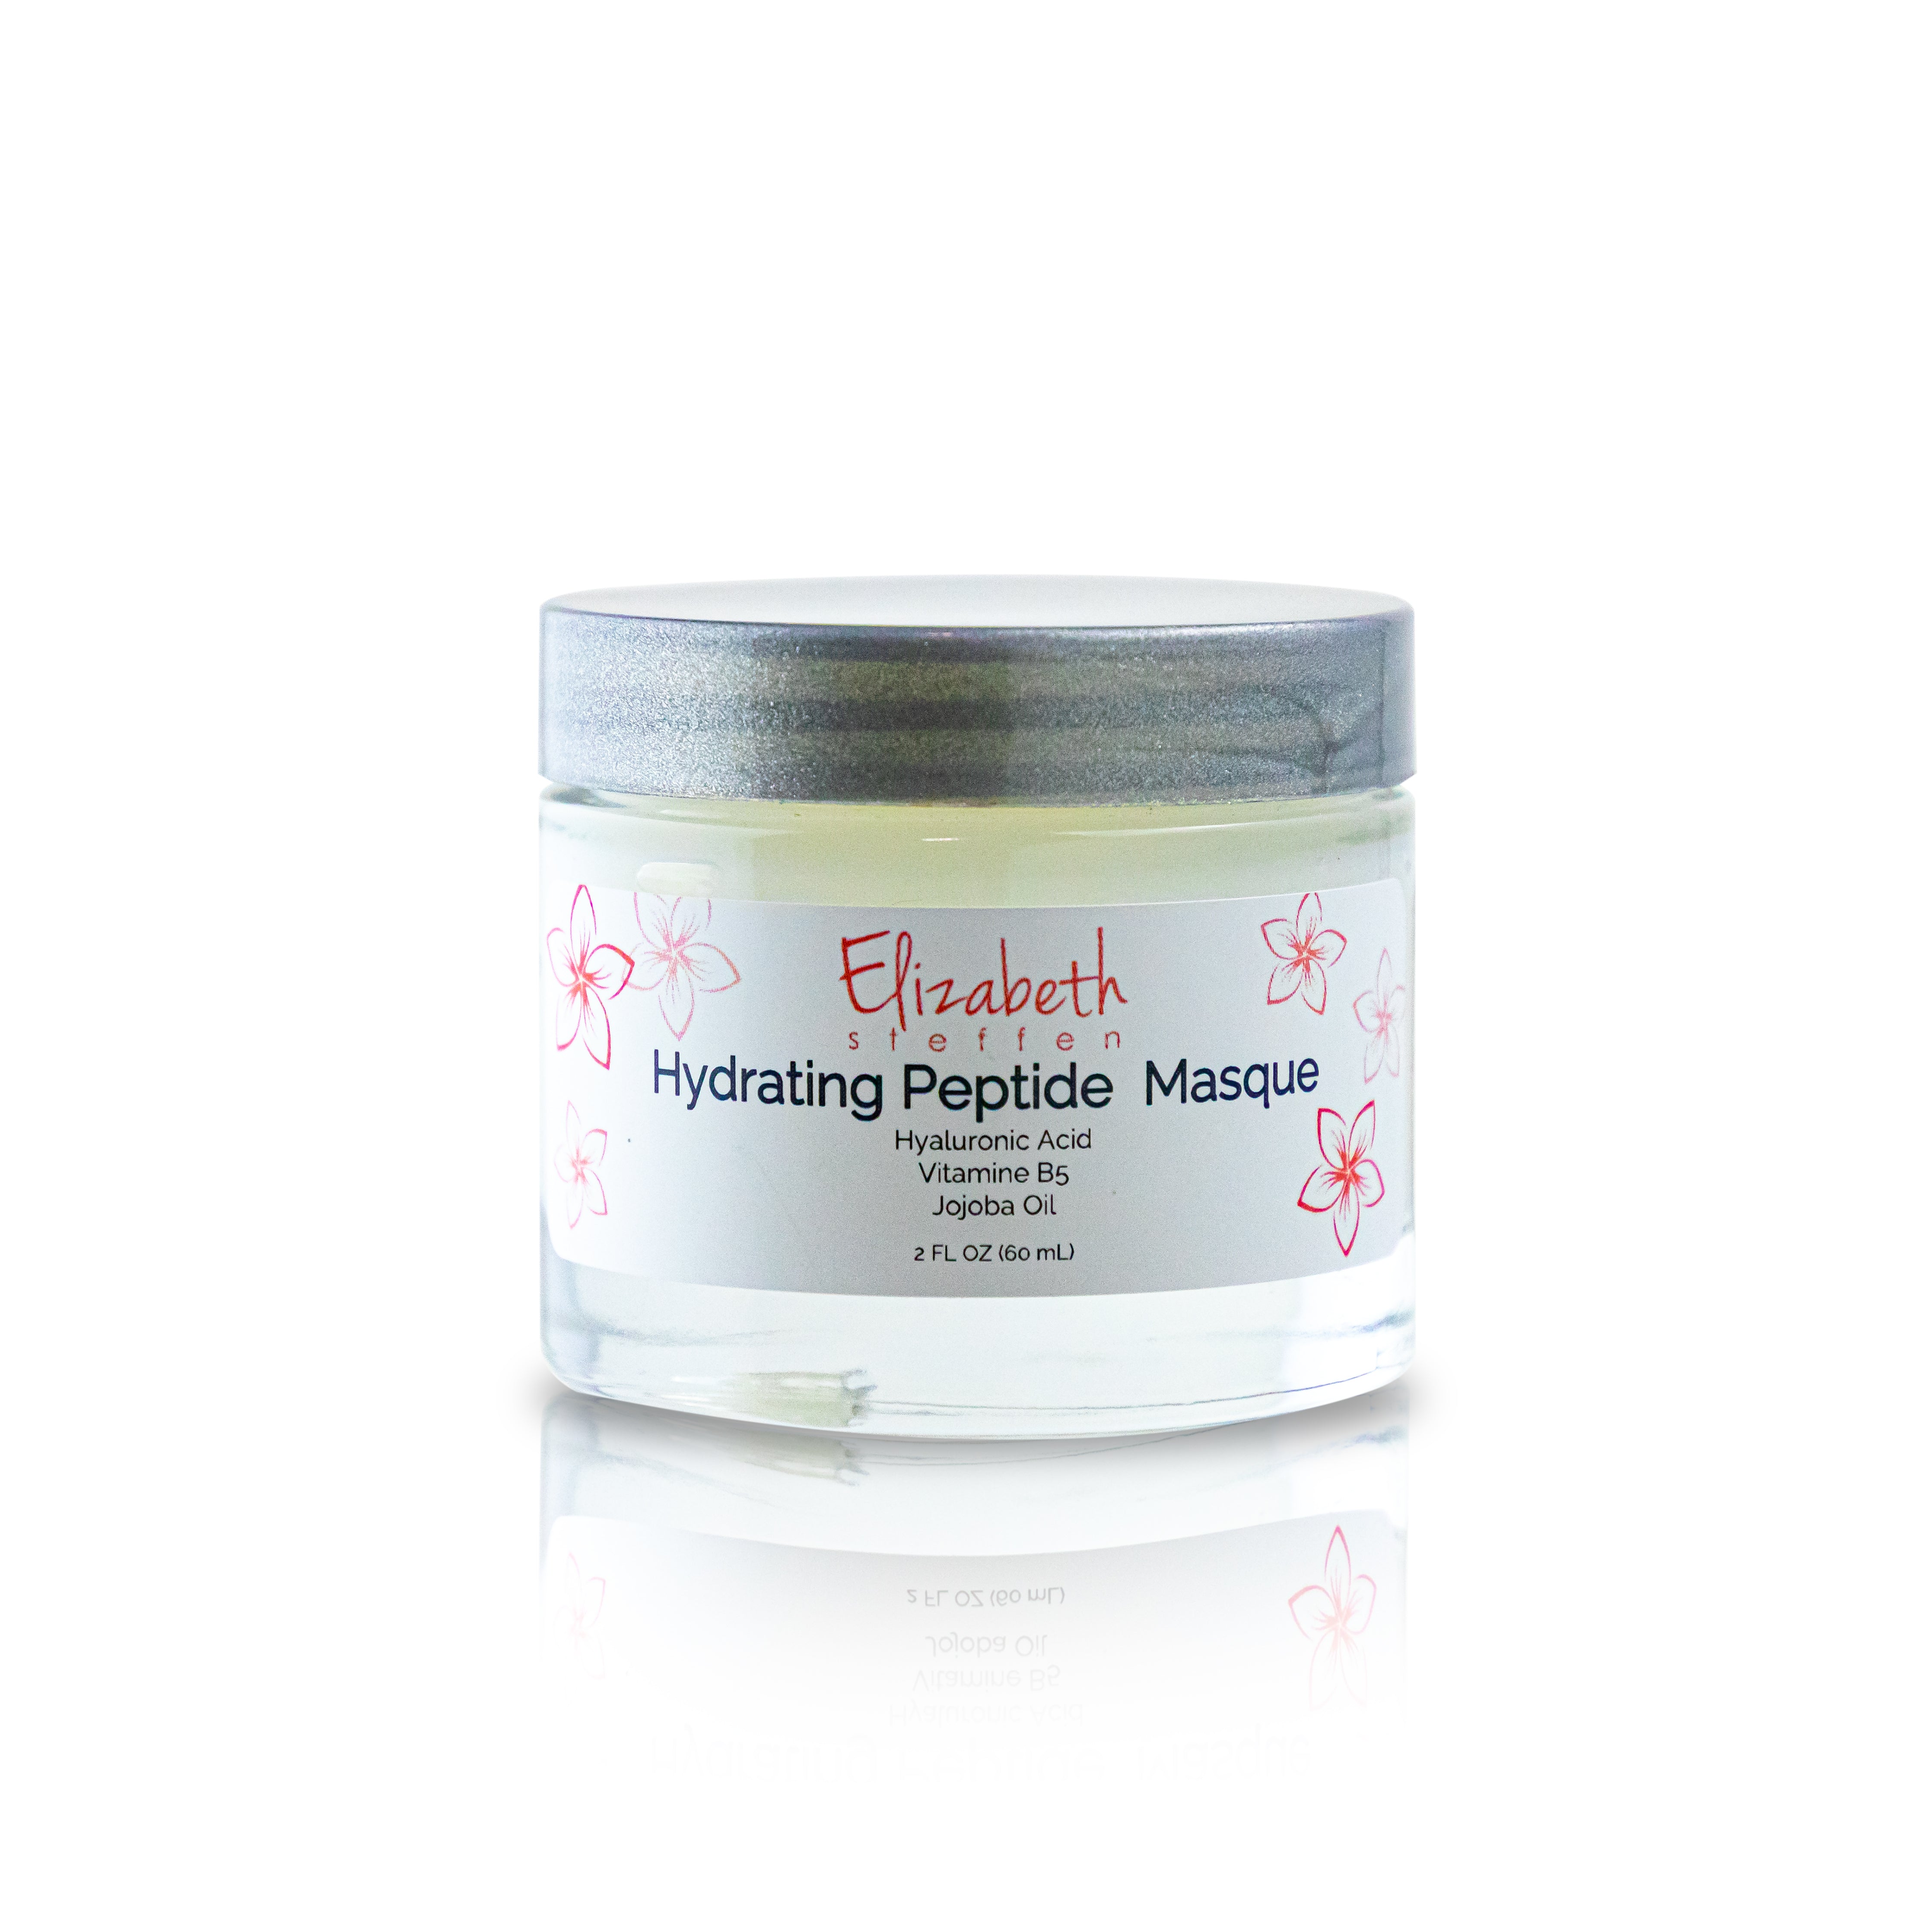 Hydrating Peptide Masque